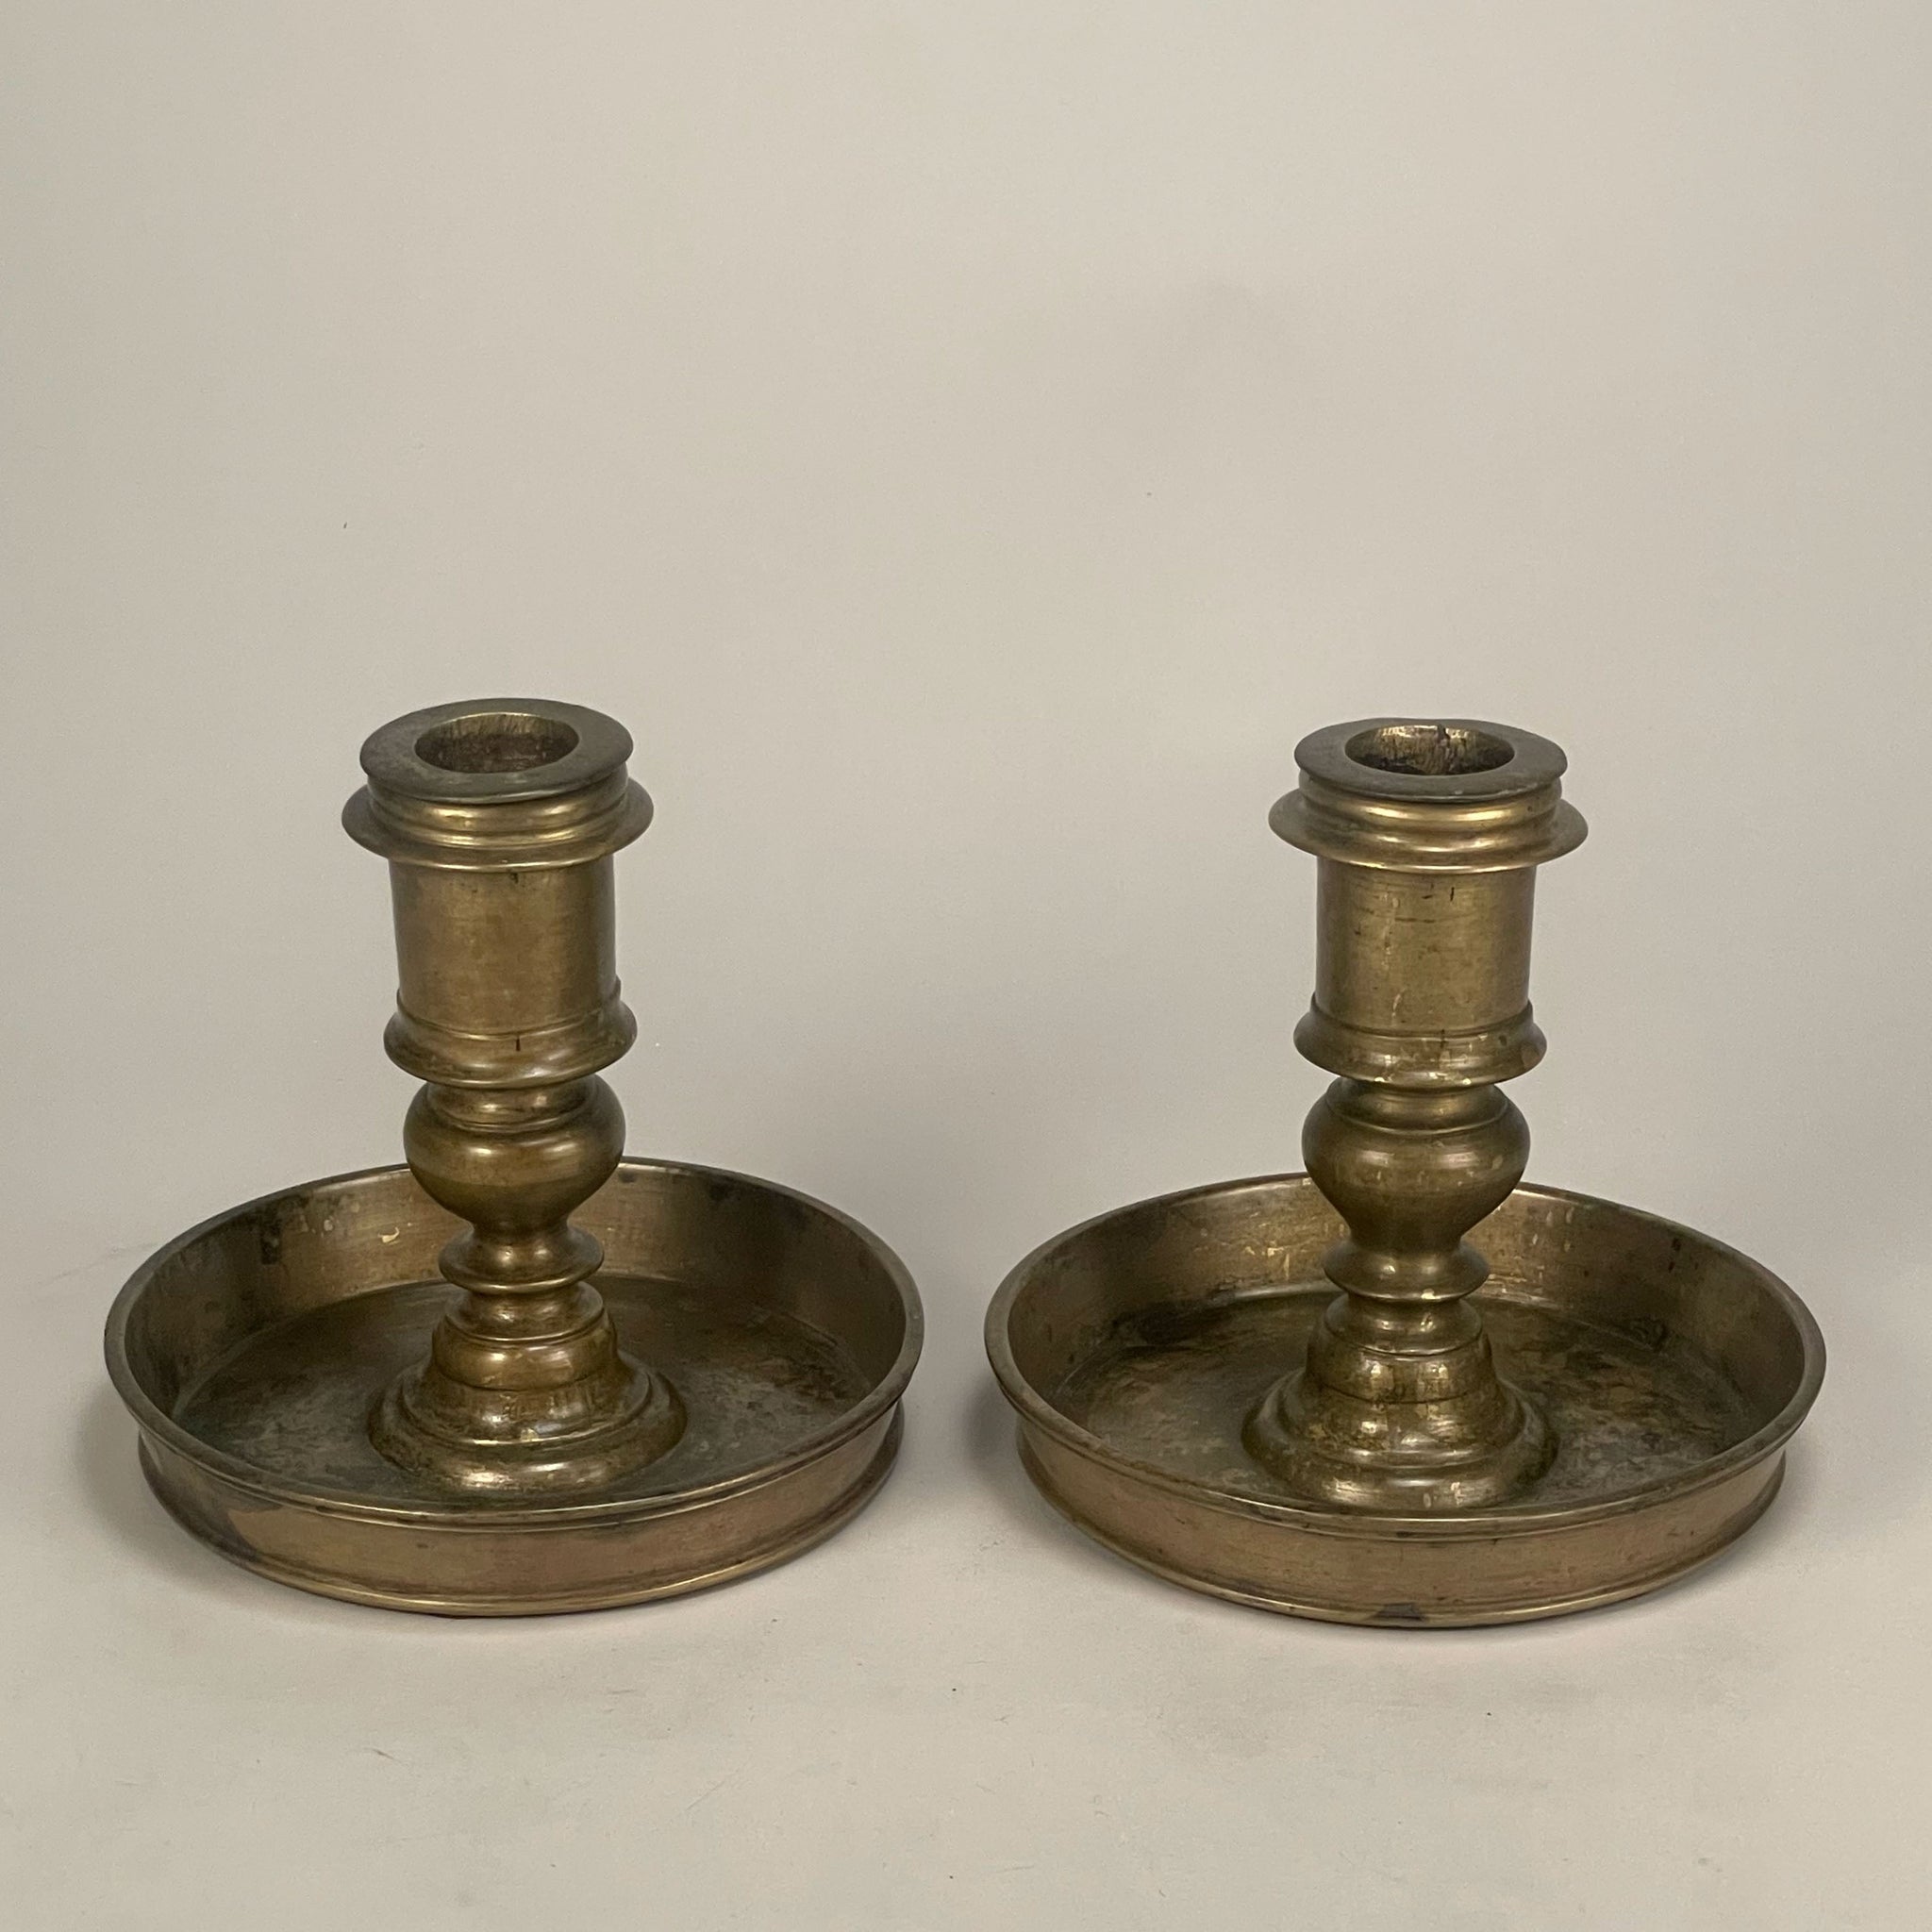 Pair Of Dutch-Colonial Candleholders